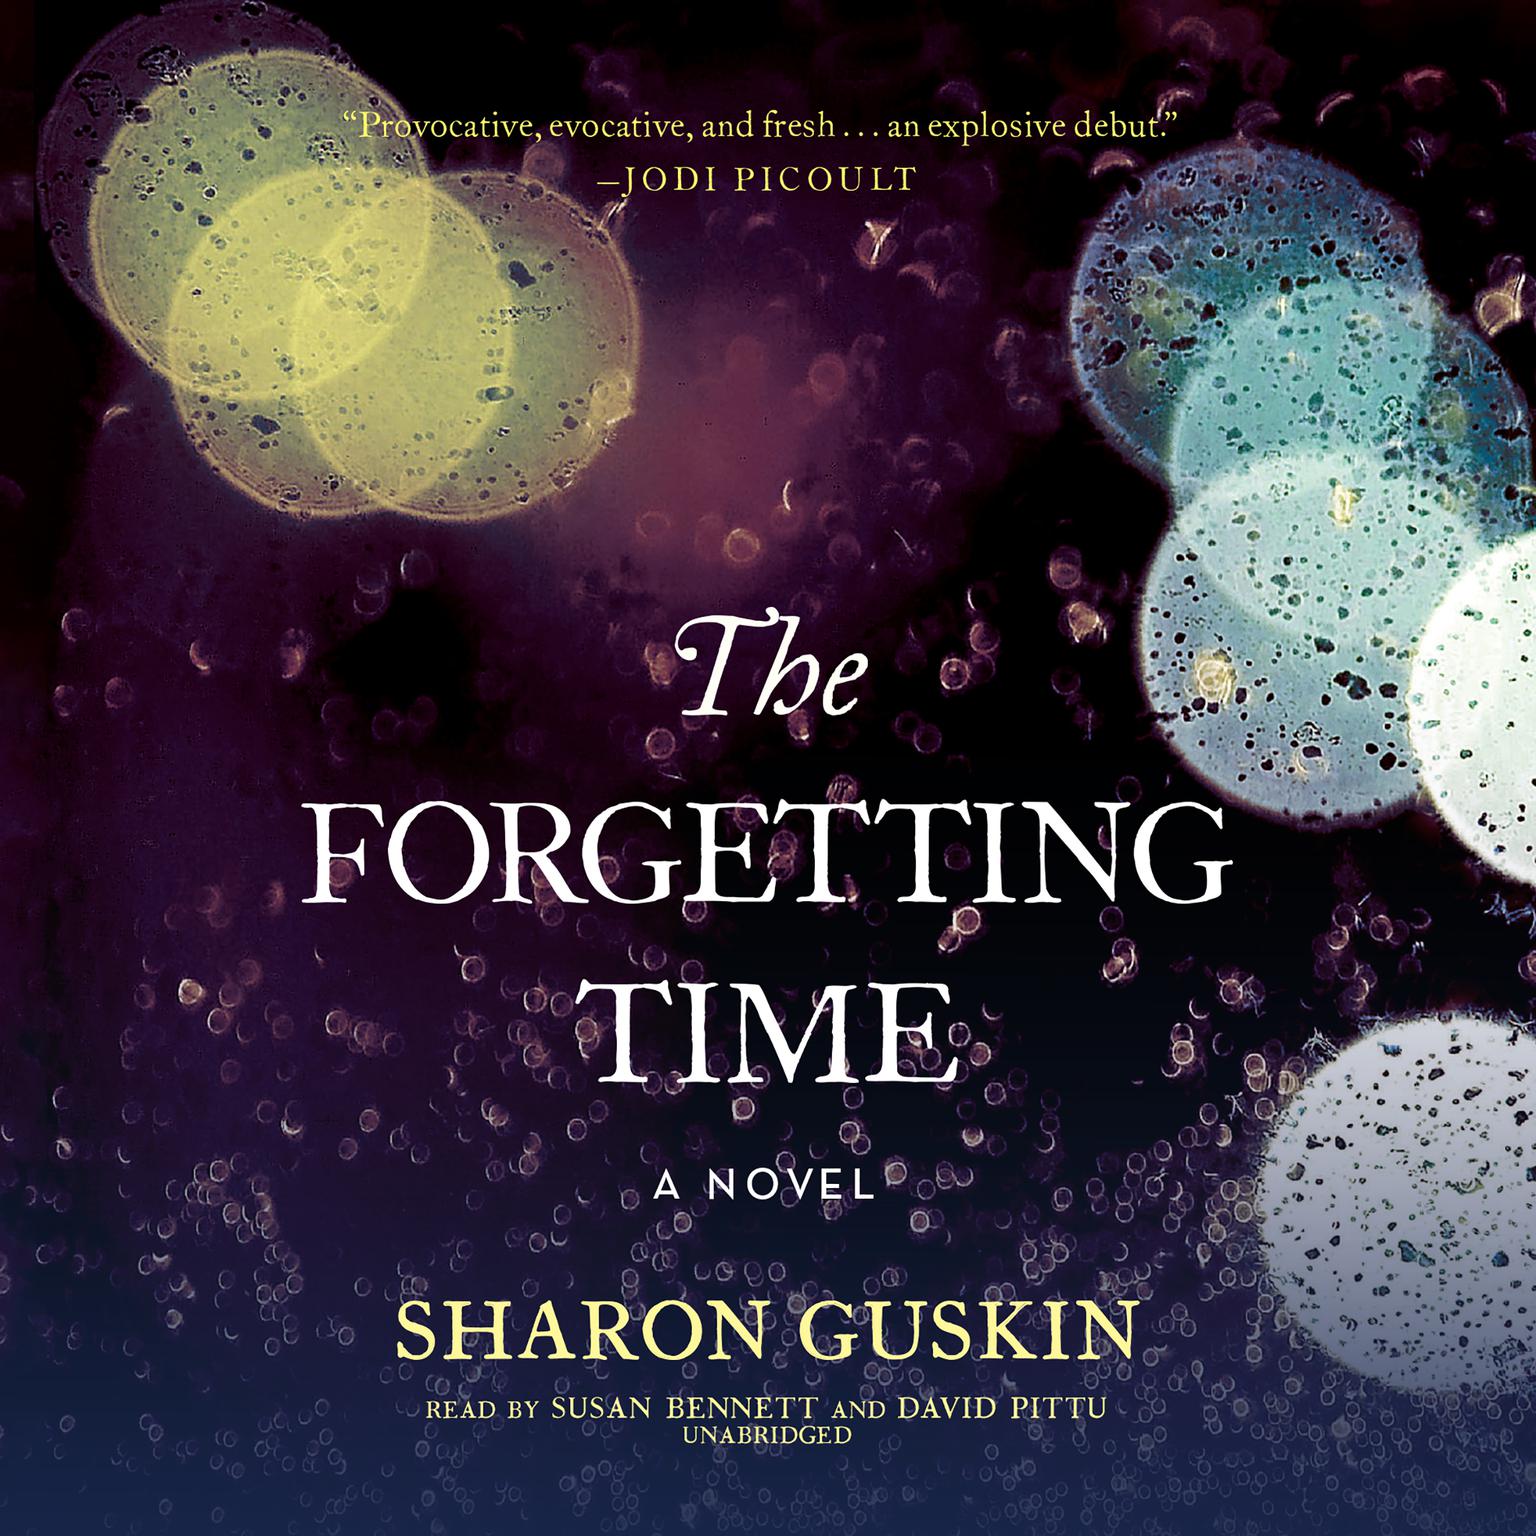 The Forgetting Time Audiobook By Sharon Guskin — Listen Instantly